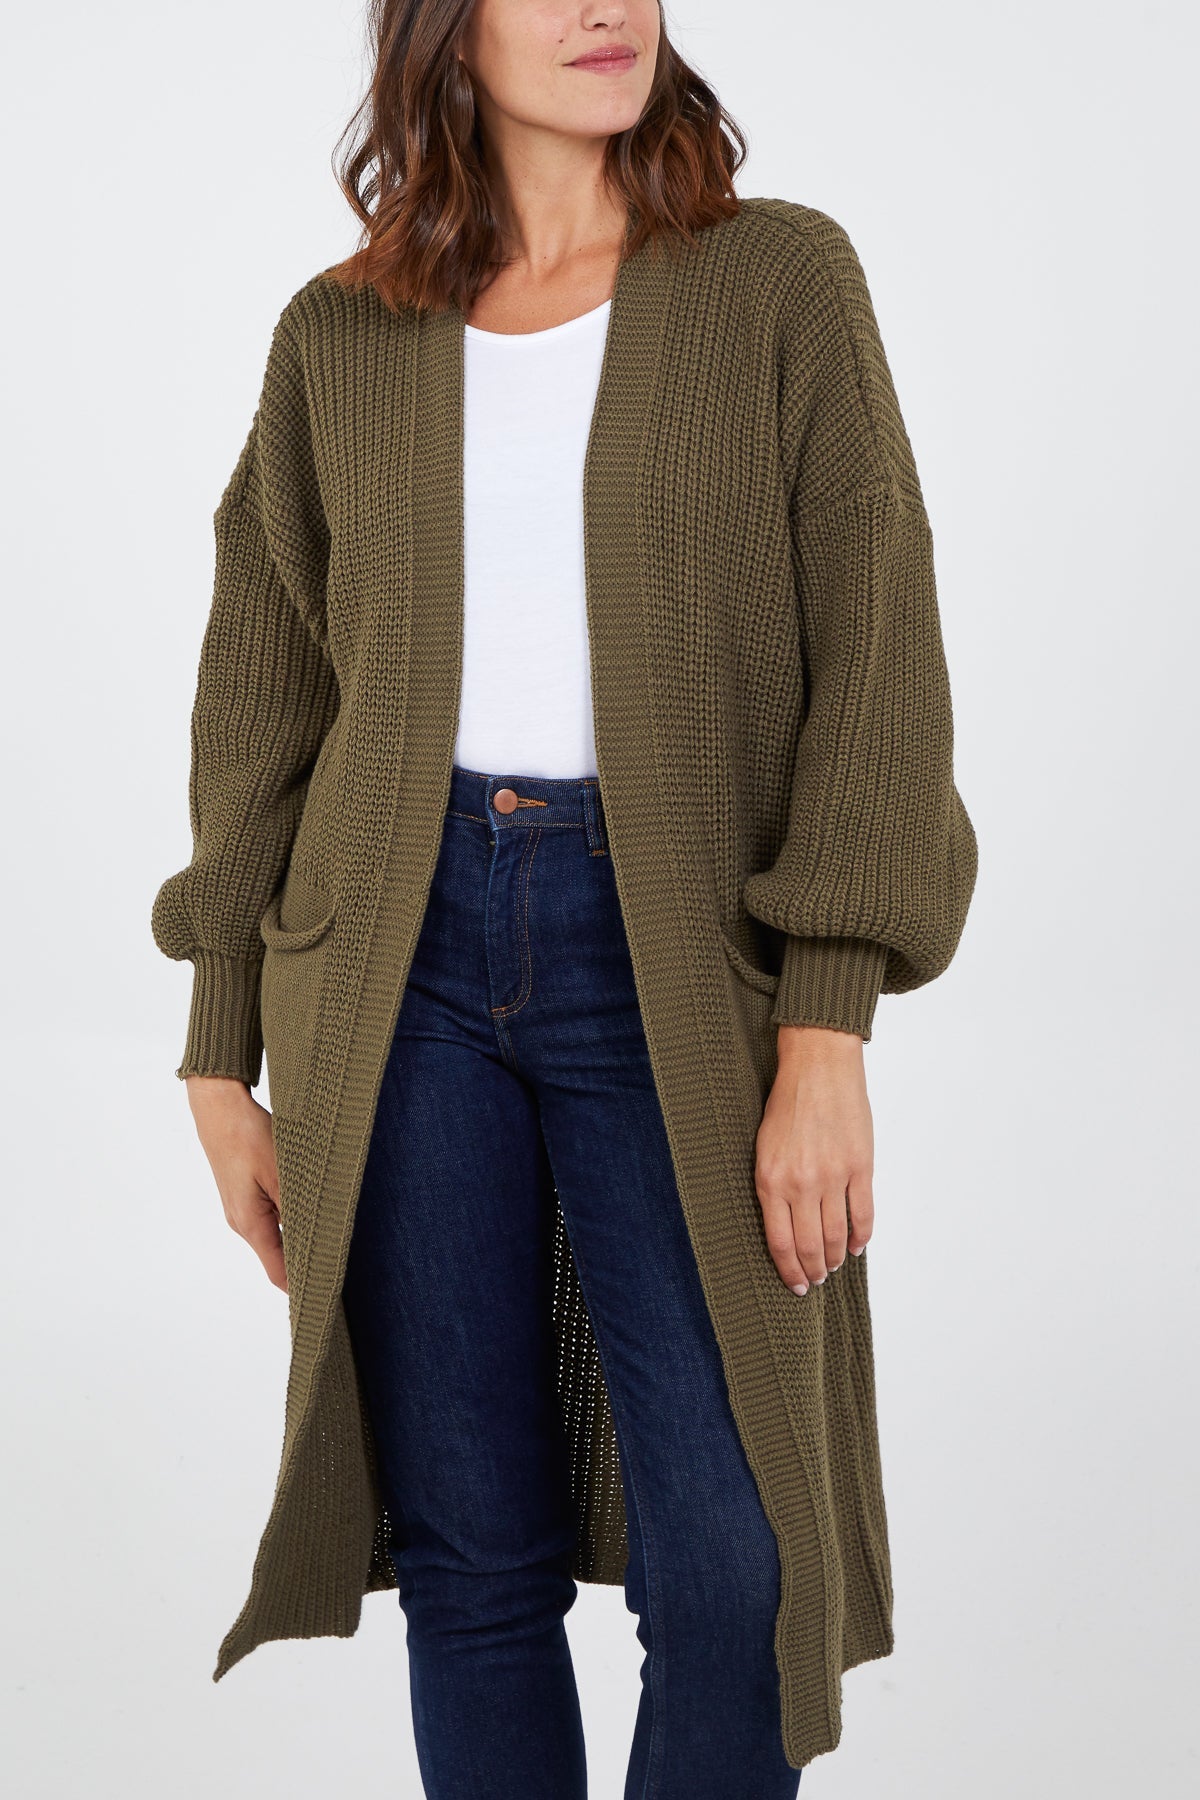 Edge To Edge Knitted Long Cardigan